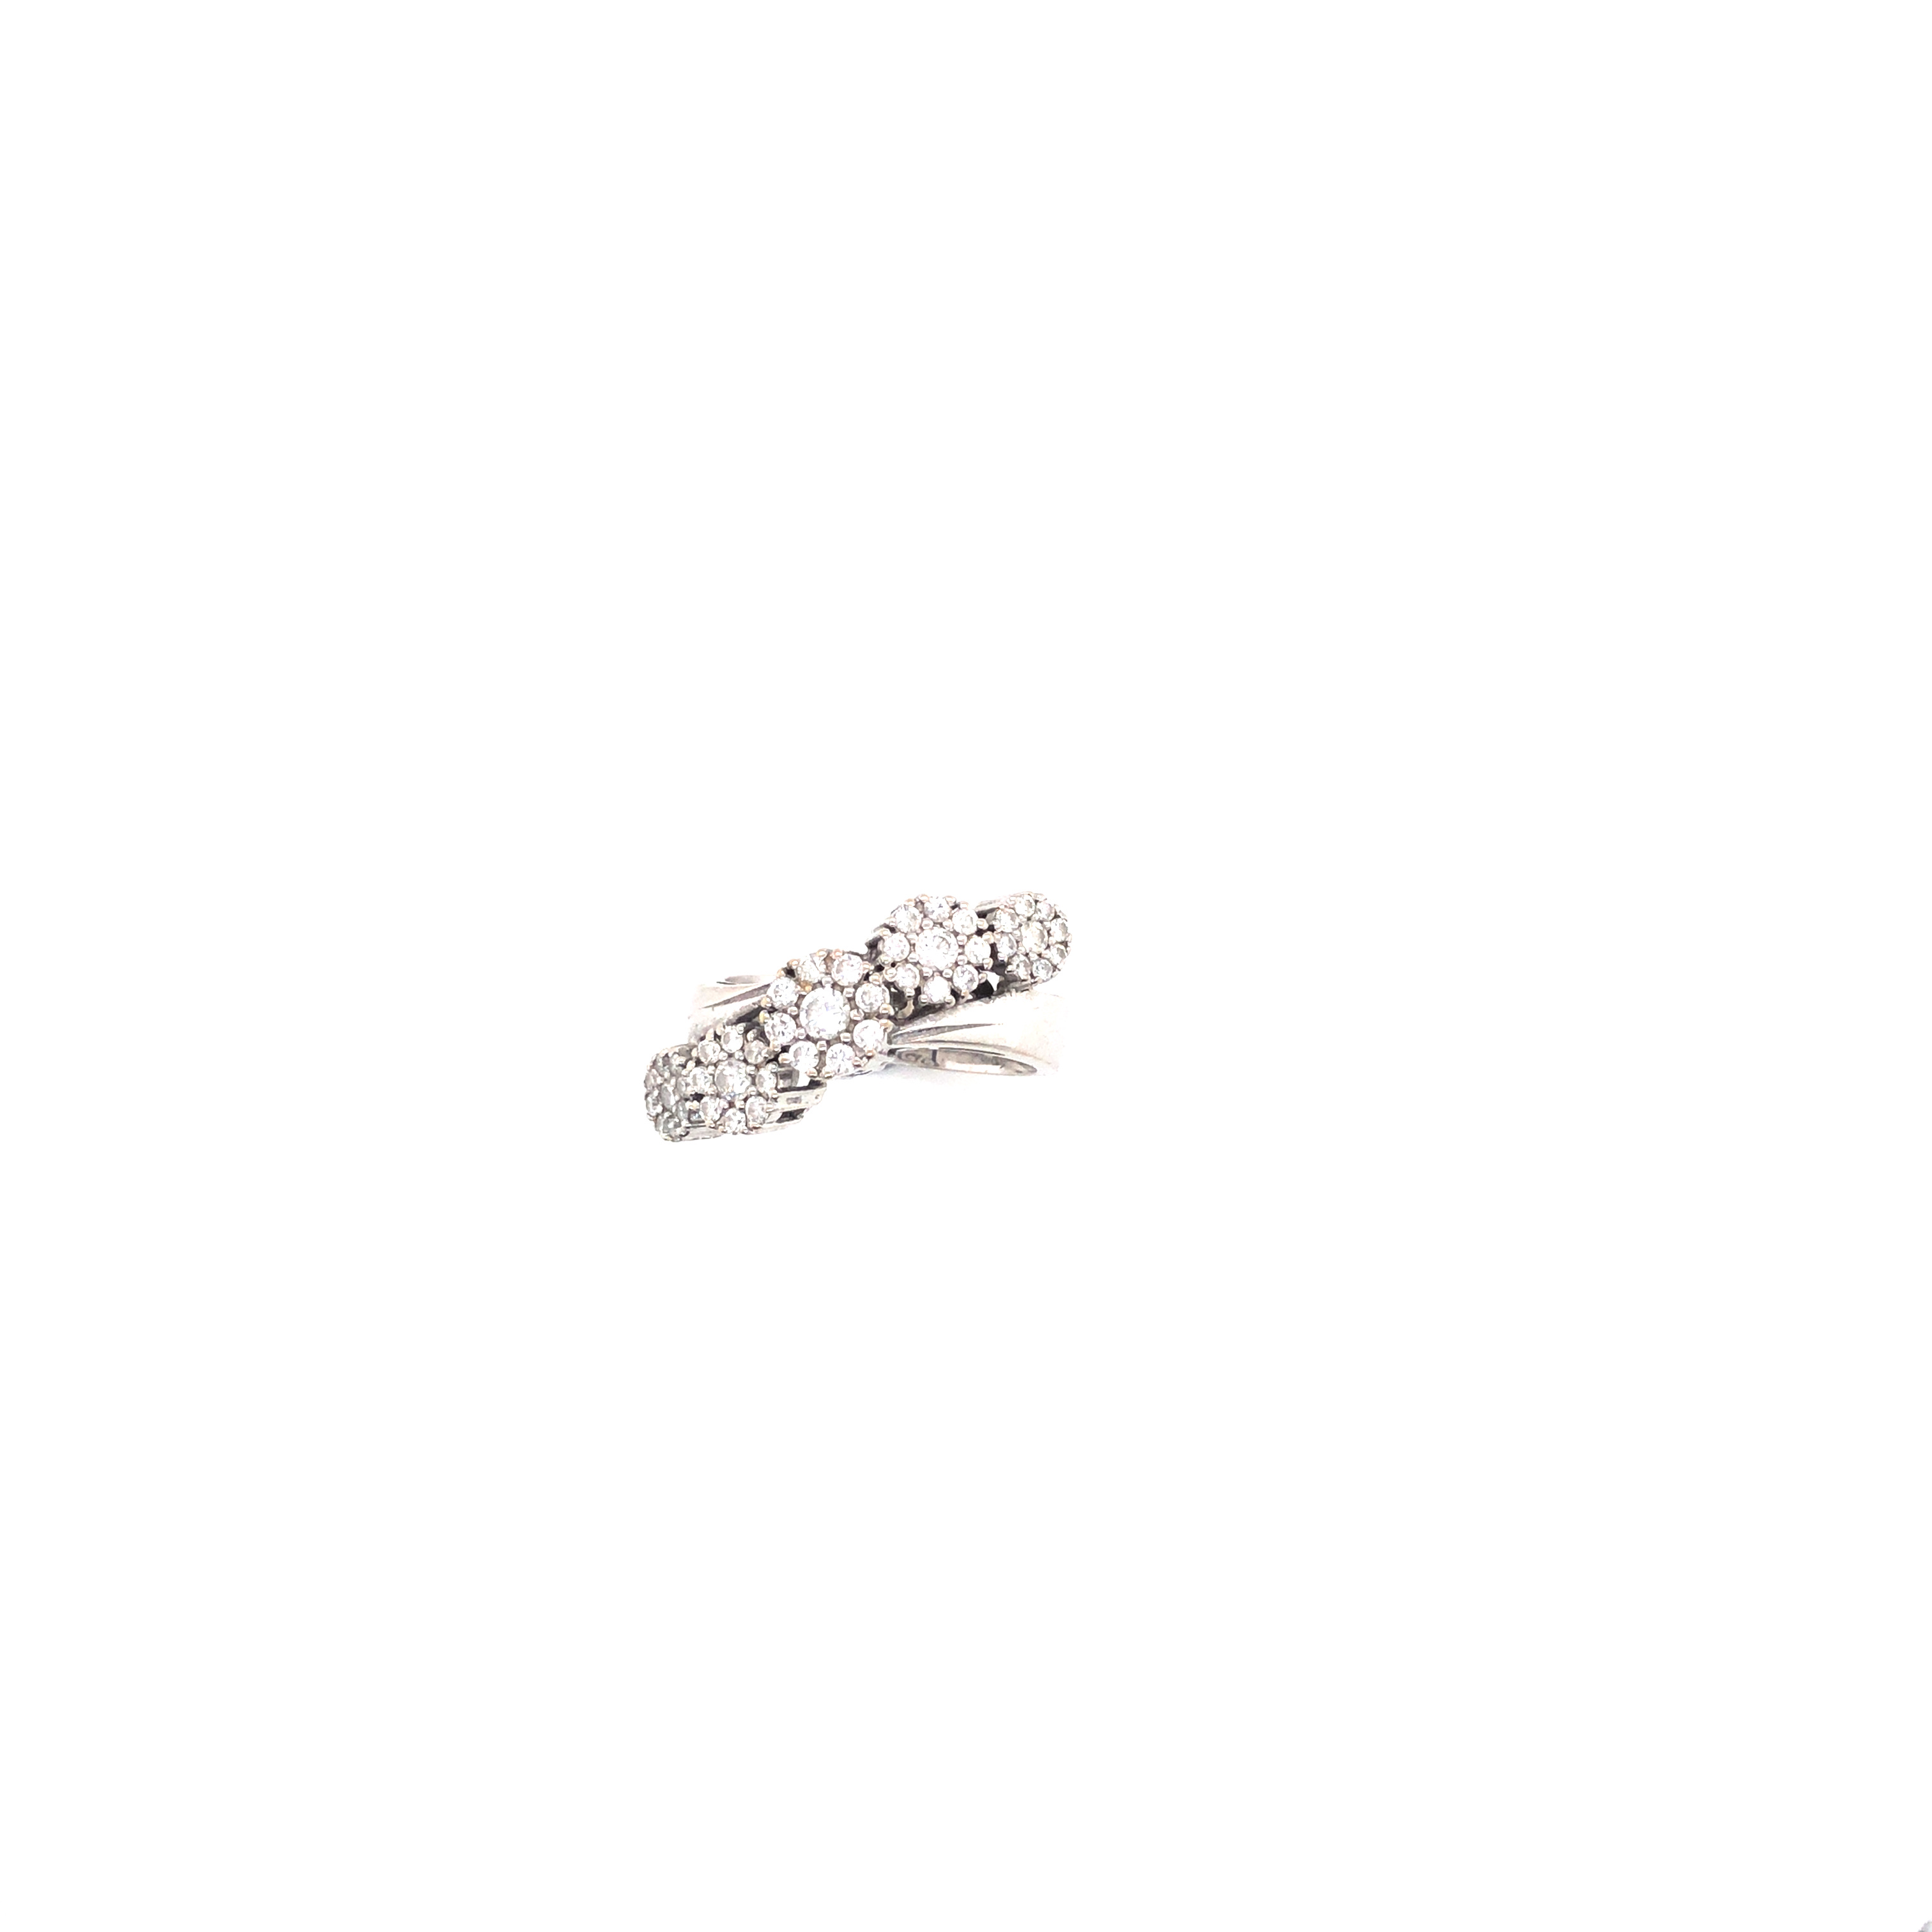 A GRADUATED FIVE CLUSTER DIAMOND RING. UNHALLMARKED, STAMPED 750, ASSESSED AS 18ct WHITE GOLD. - Image 3 of 5